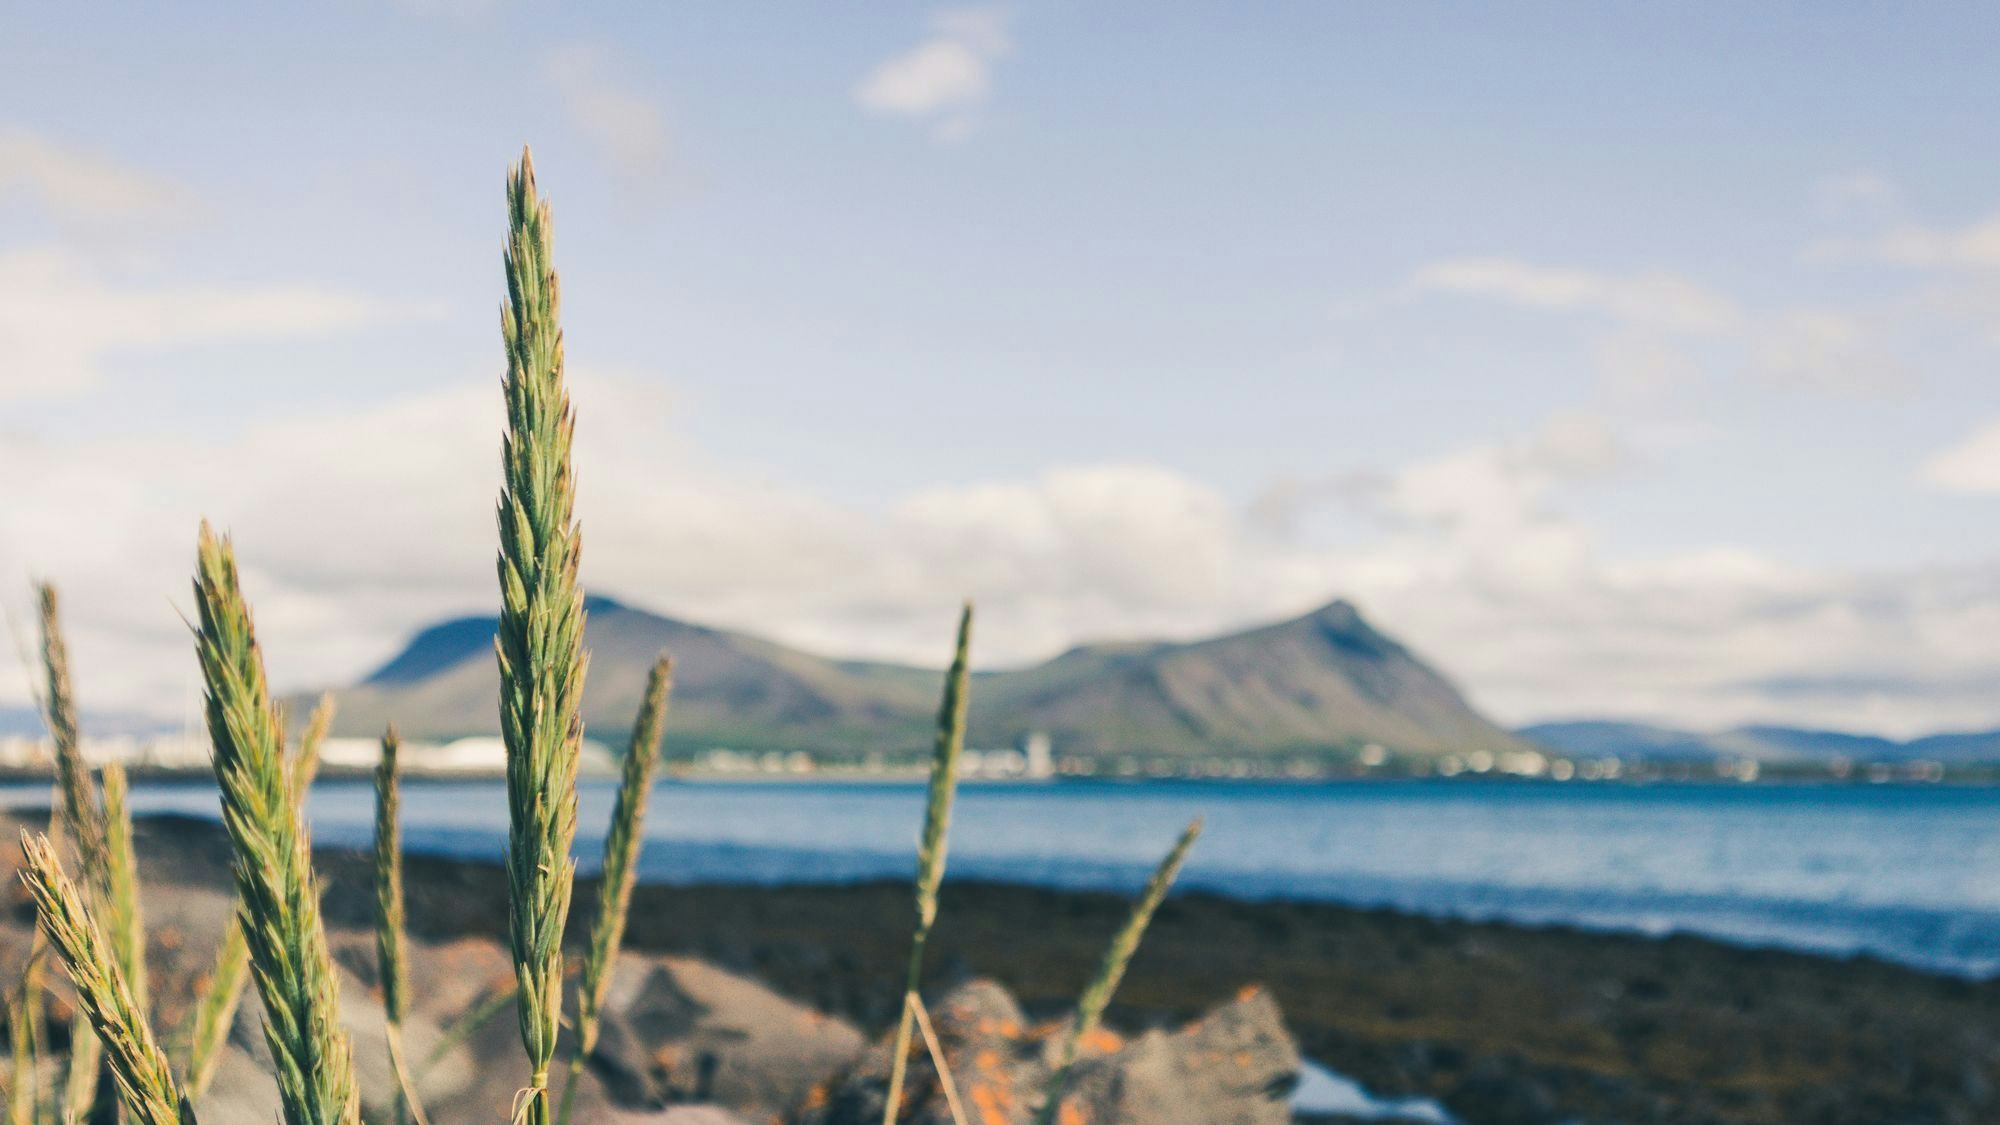 Straw in foreground, black beach and blue sea, mountain or island in background out of focus